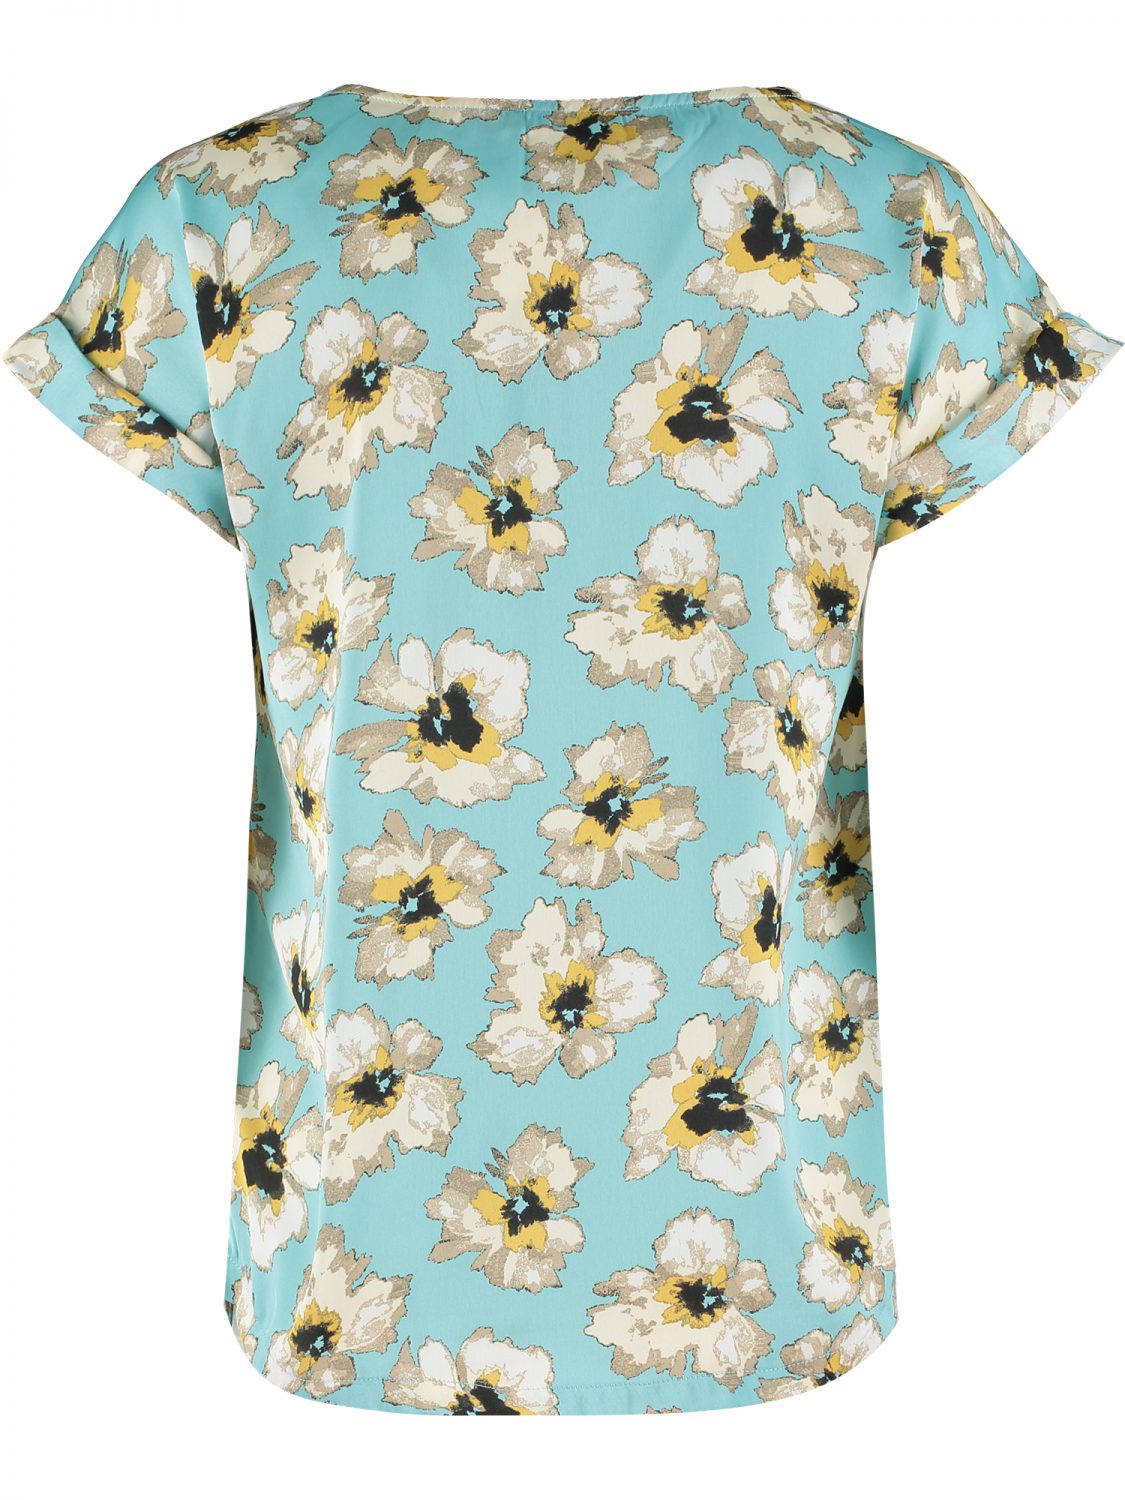 Turquoise Floral Top is a really gorgeous look, lovely repeat floral print